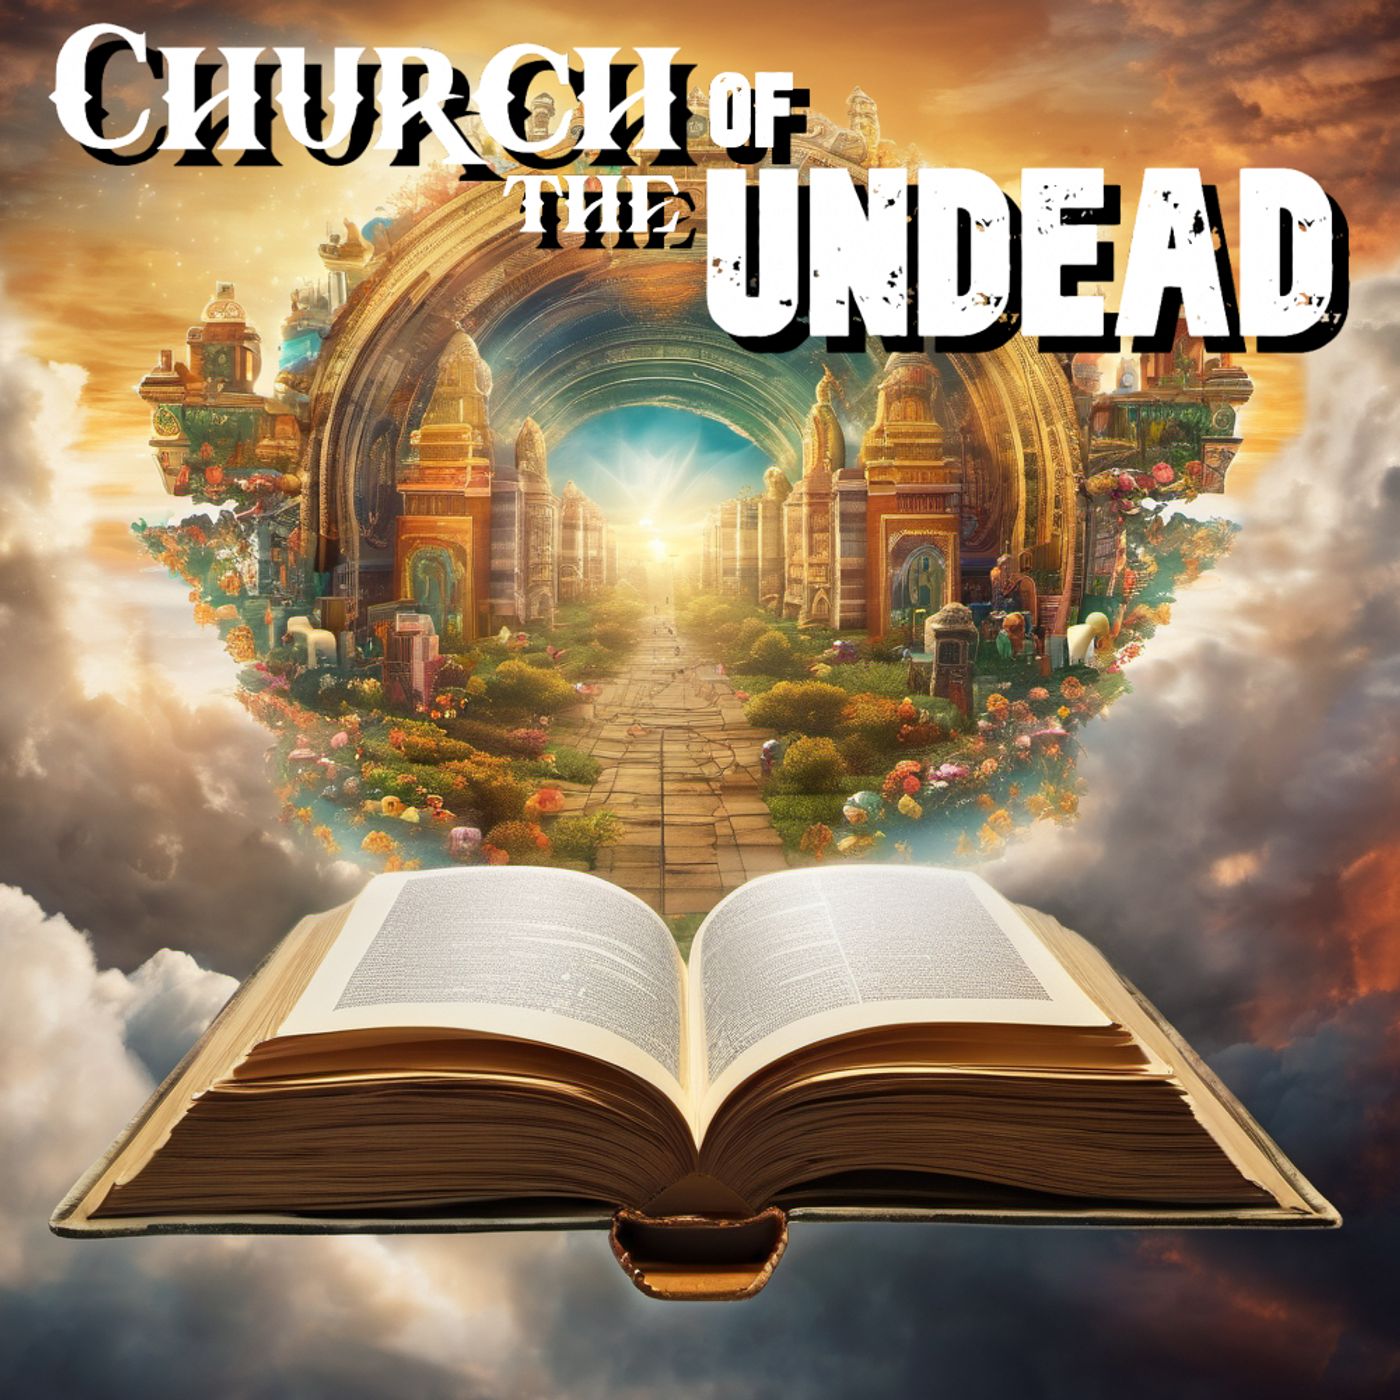 “How Can I Know If I’m In The Book Of Life?” #ChurchOfTheUndead